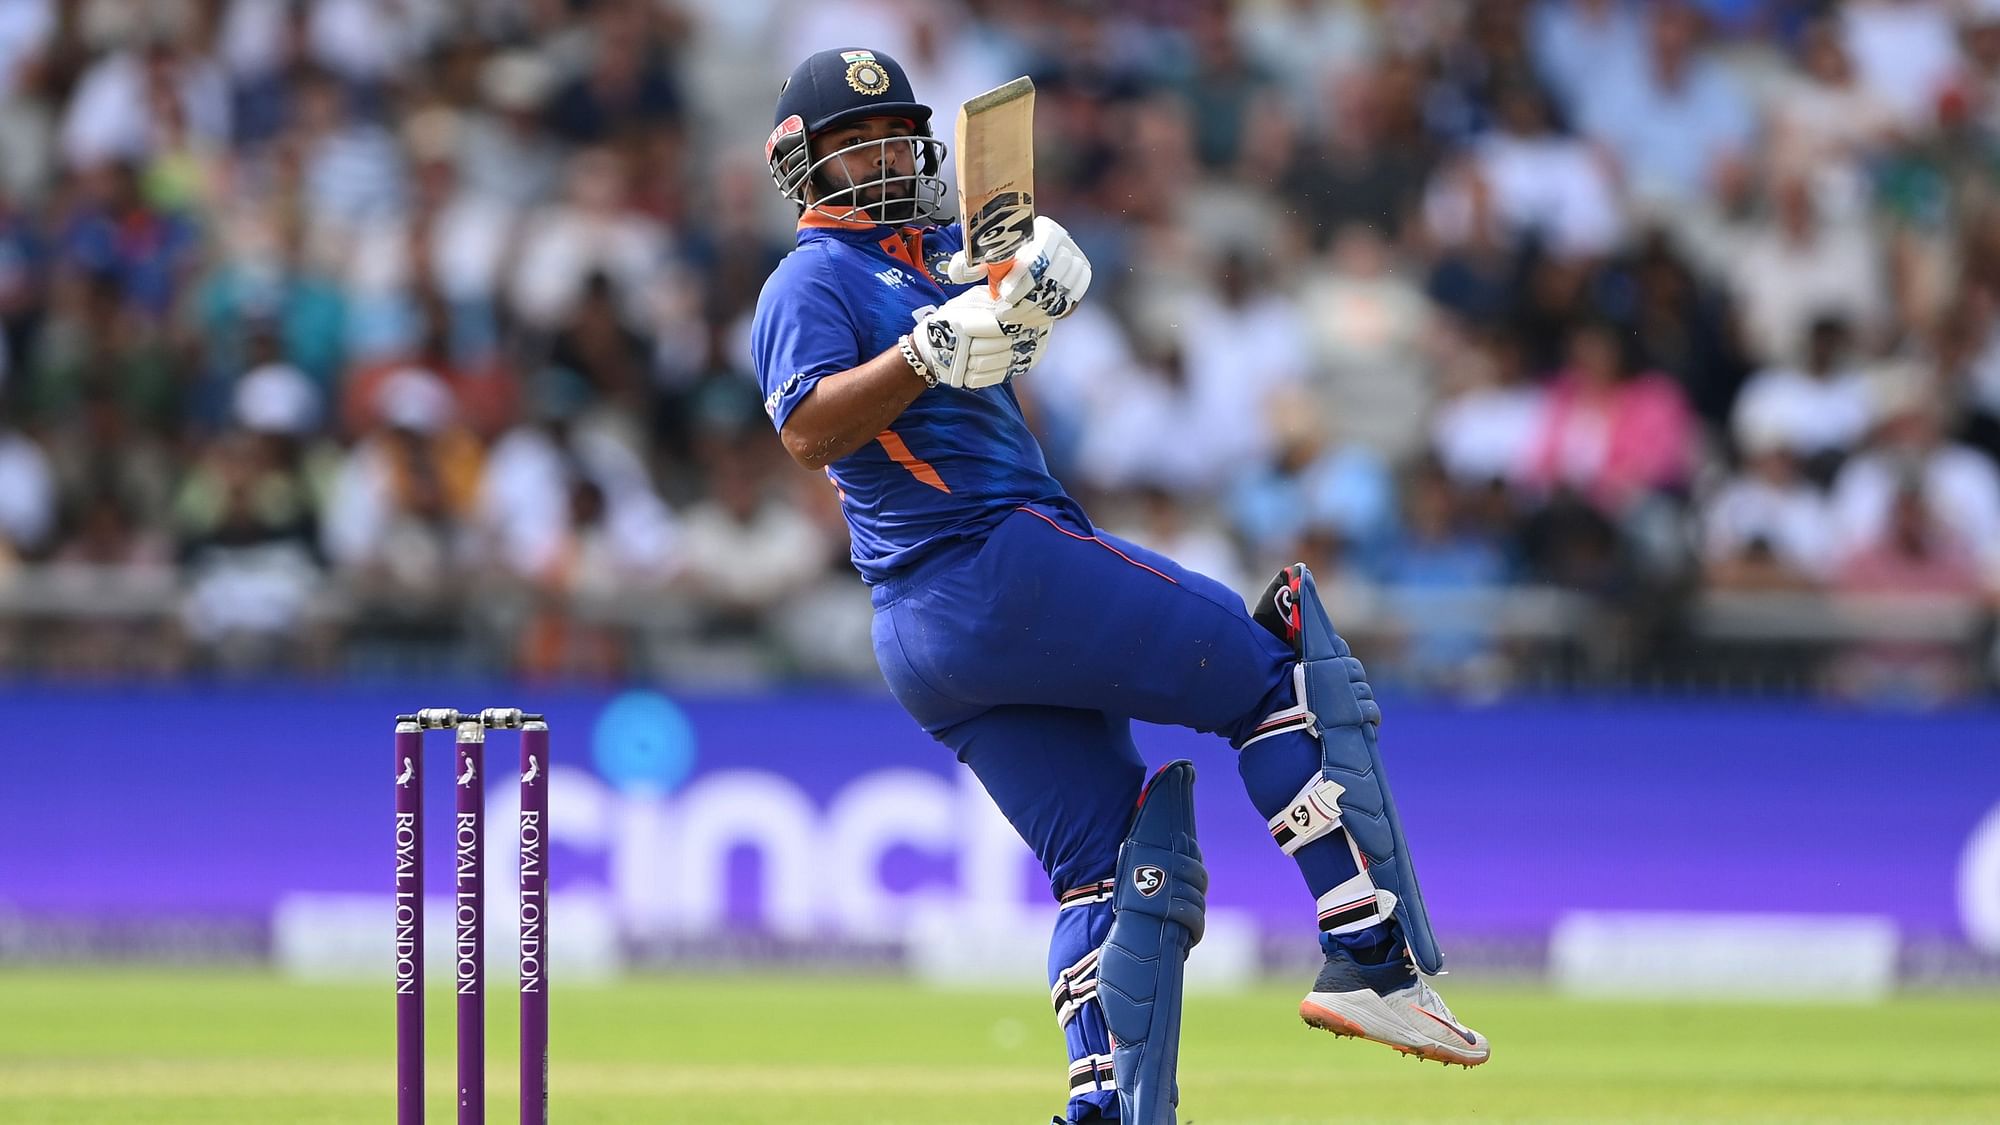 <div class="paragraphs"><p>Rishabh Pant scored an unbeaten century to help India record a five wicket win over England in the third and final ODI at Manchester on Sunday.&nbsp;</p></div>